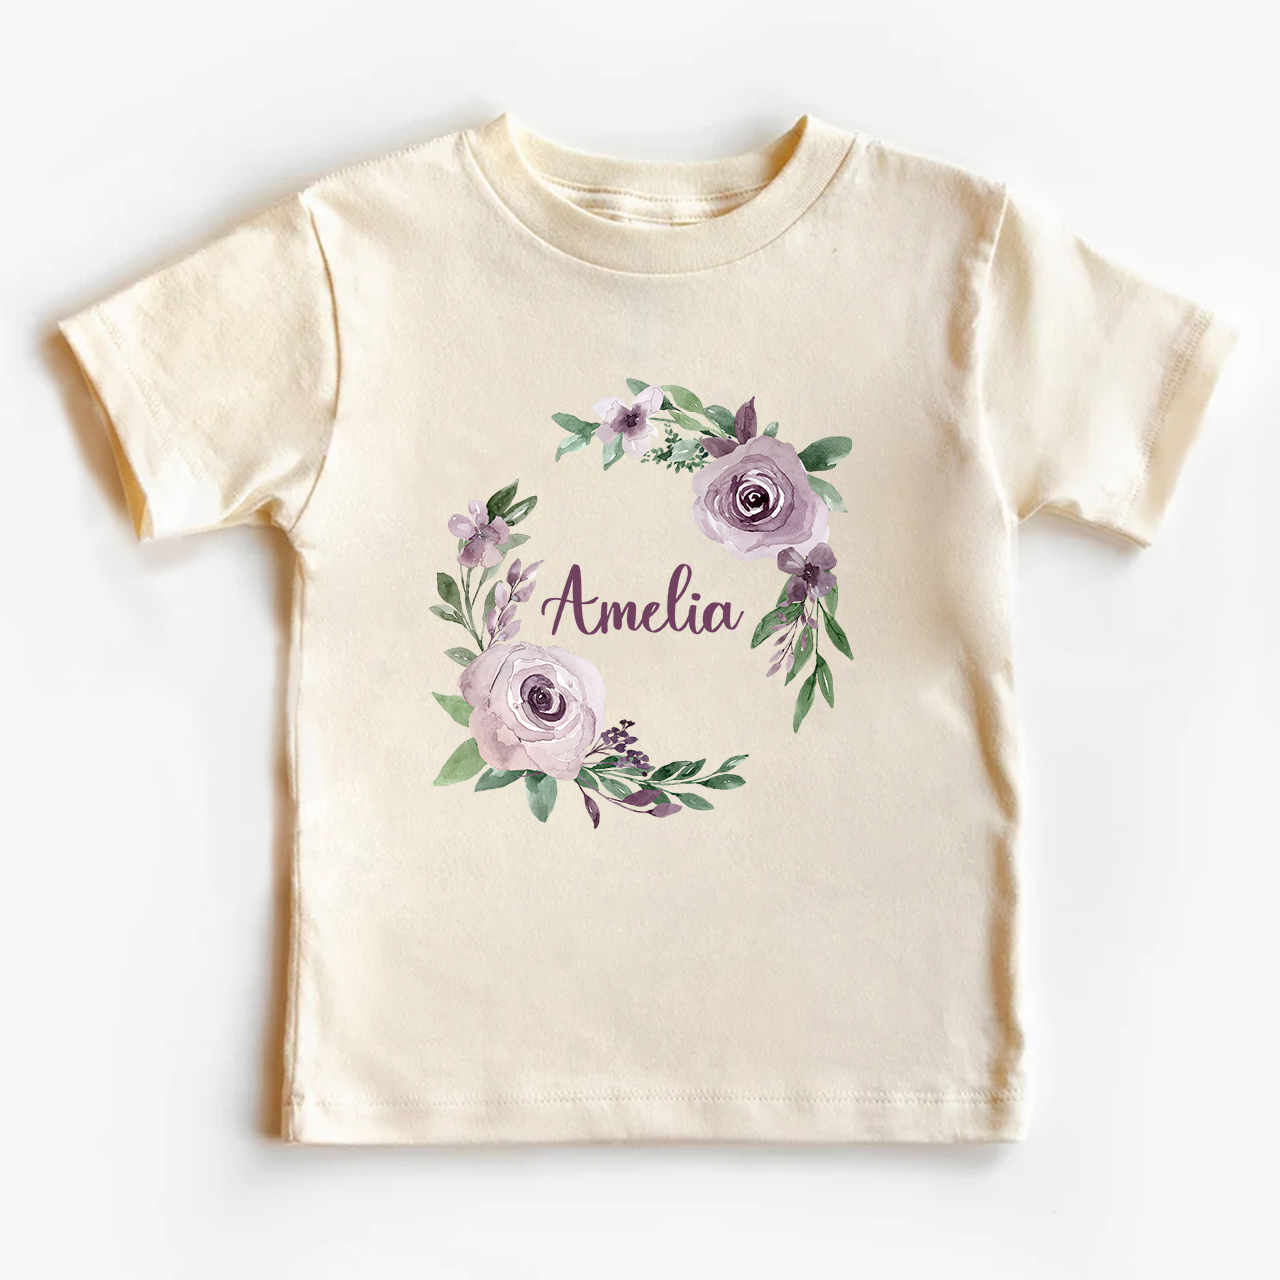 Personalized Light Purple Wreath Shirt For Kids